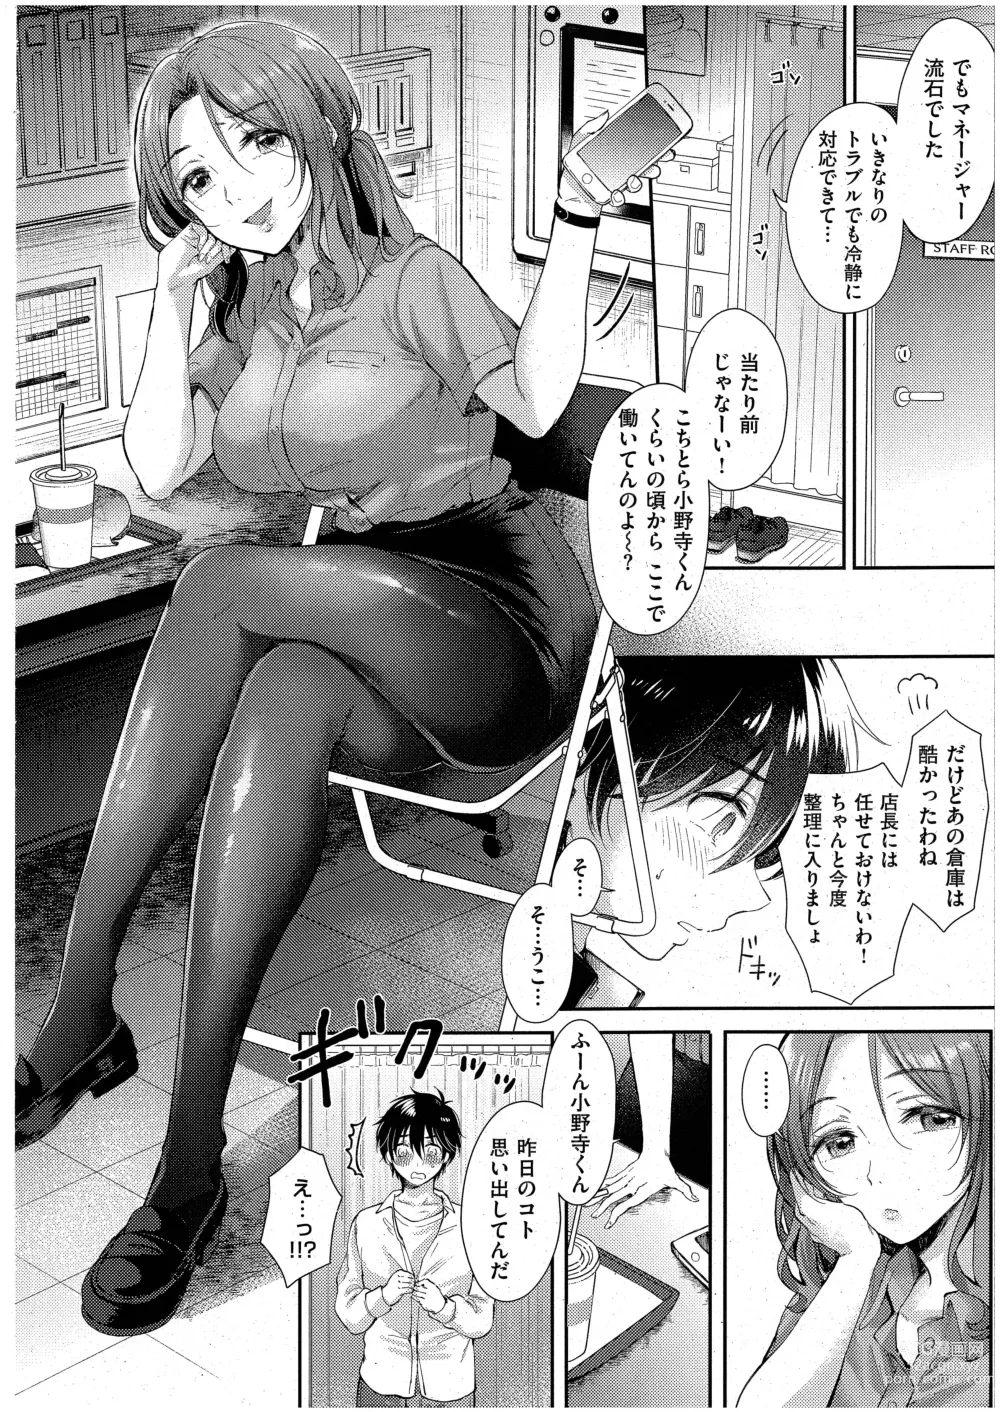 Page 10 of manga Eat in Take Out Zenpen